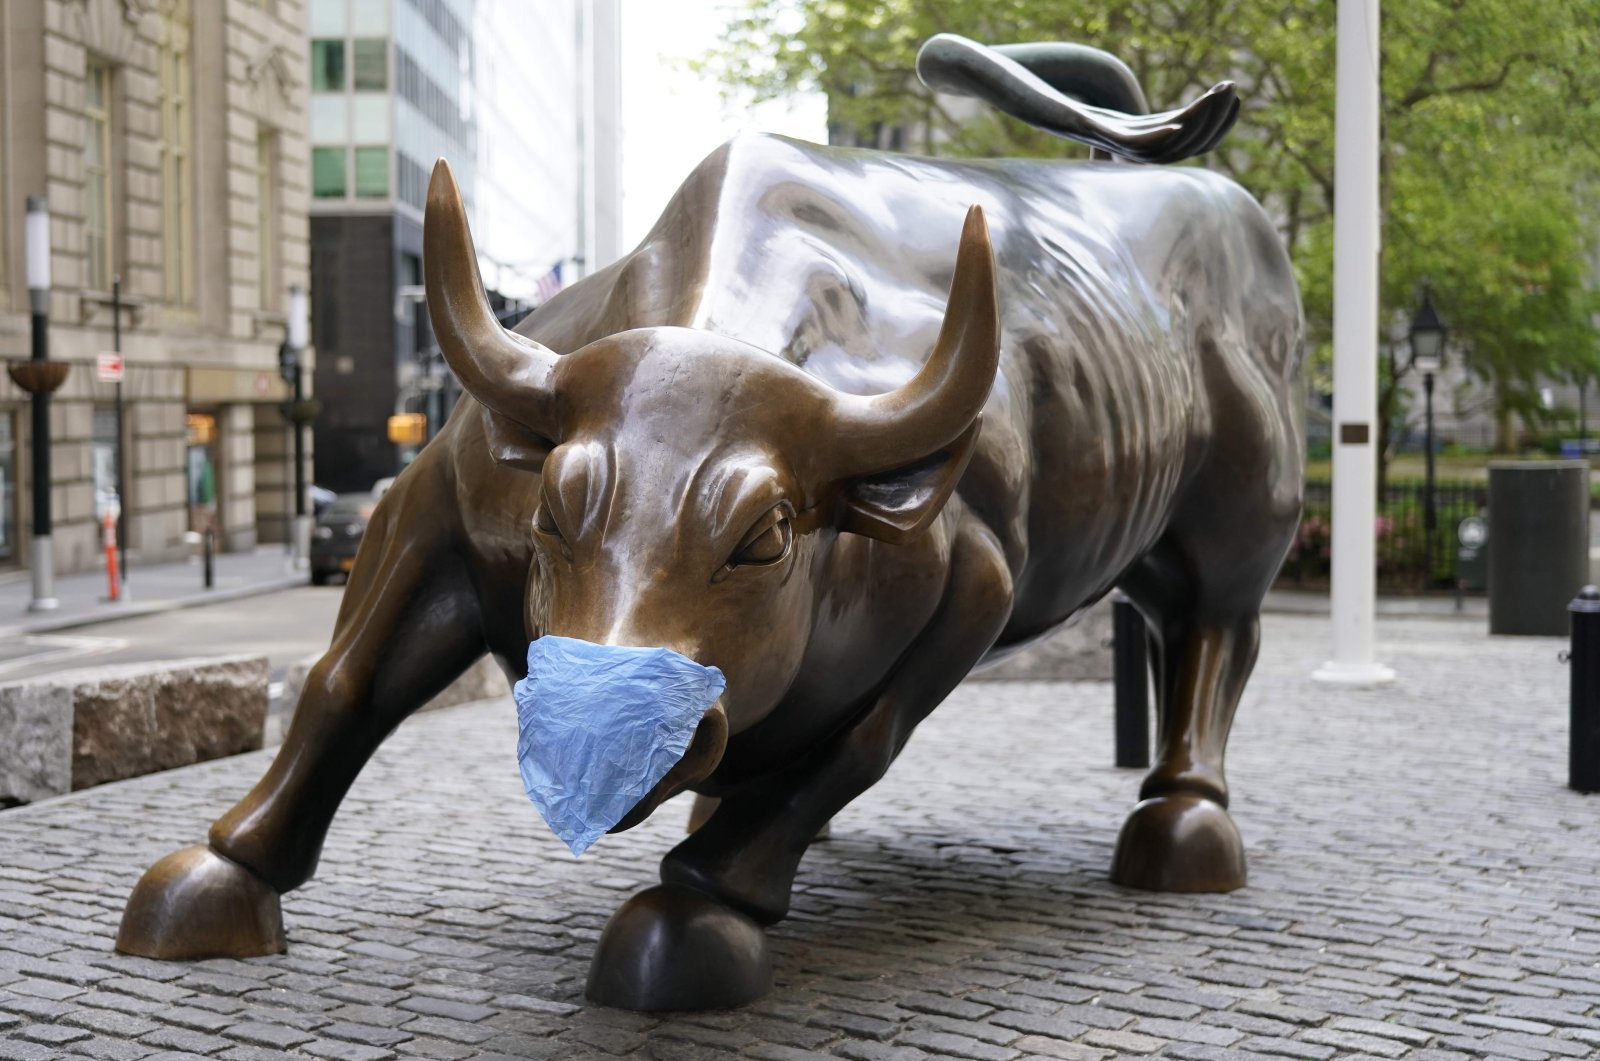 The Charging Bull, sometimes referred to as the Wall Street Bull, in the Financial District of Manhattan with a facemask in New York City, New York on May 19, 2020. (AFP Photo)